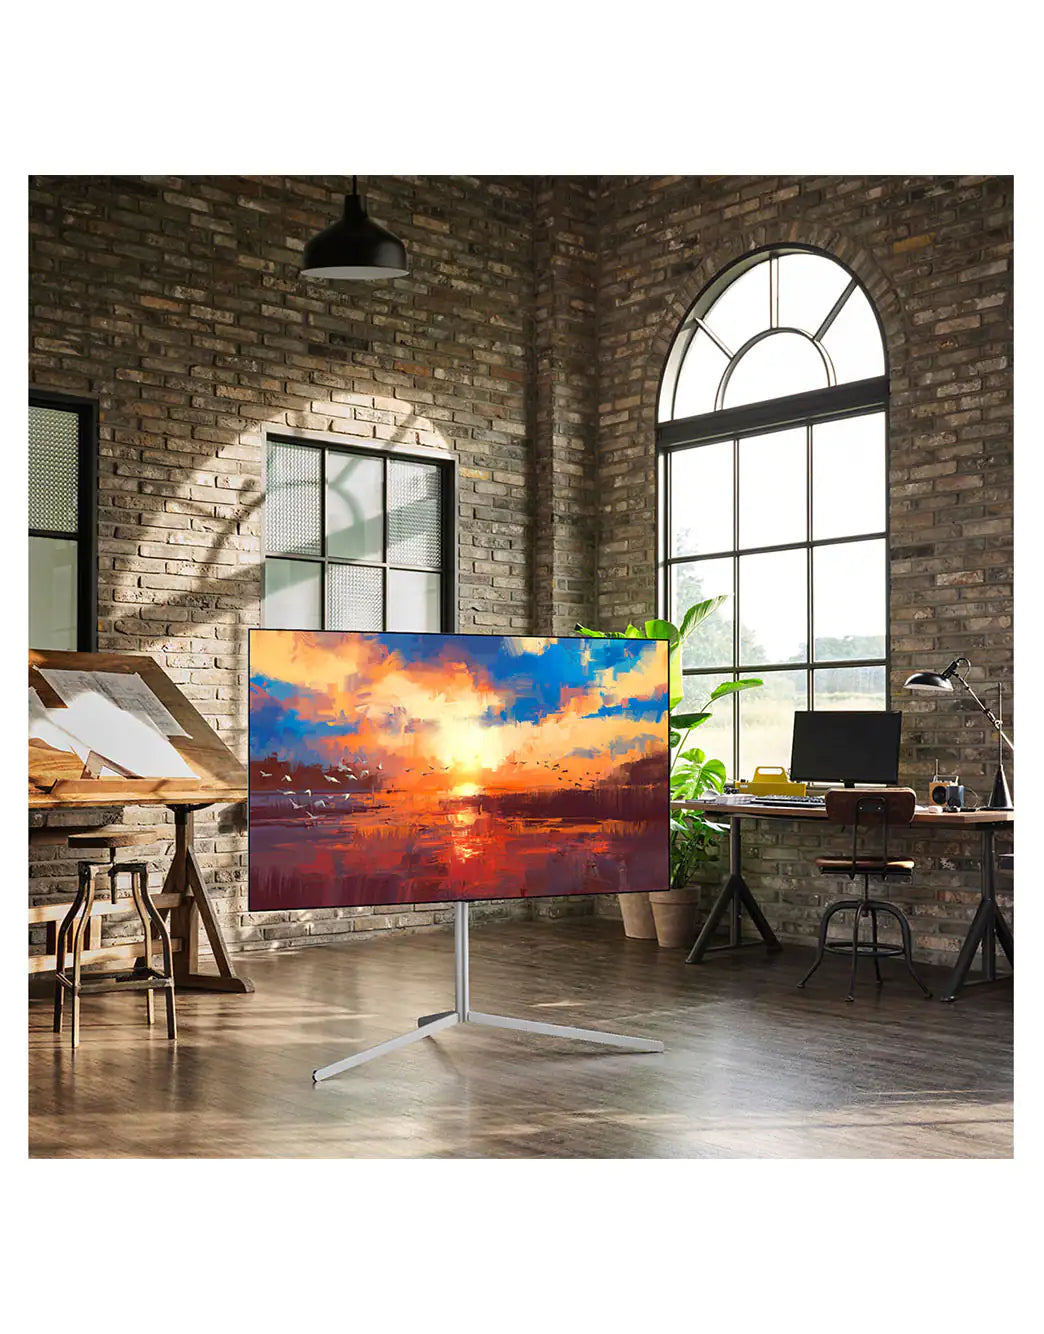 LG OLED TV 65 Inch A1 Series, 4K Cinema HDR WebOS Smart AI ThinQ Pixel Dimming